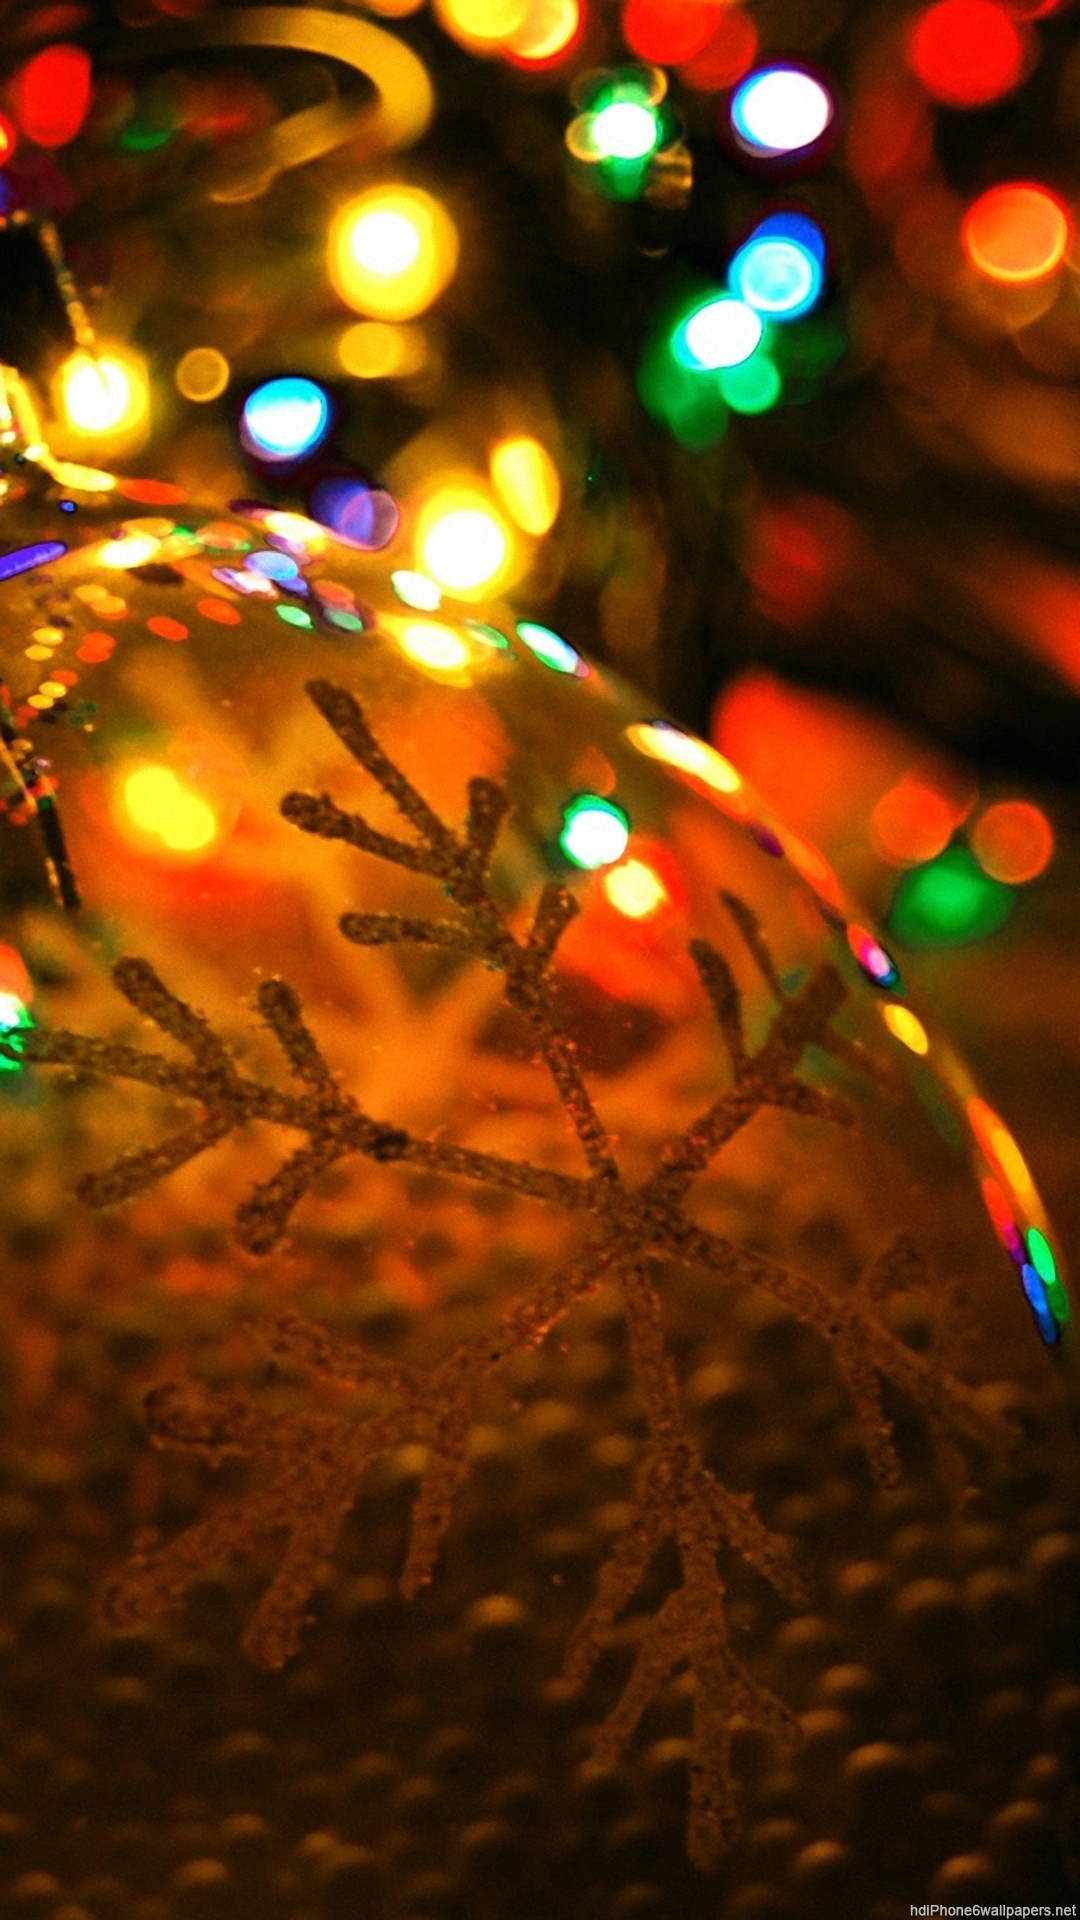 Christmas Wallpapers Hd 1080p 75 Images